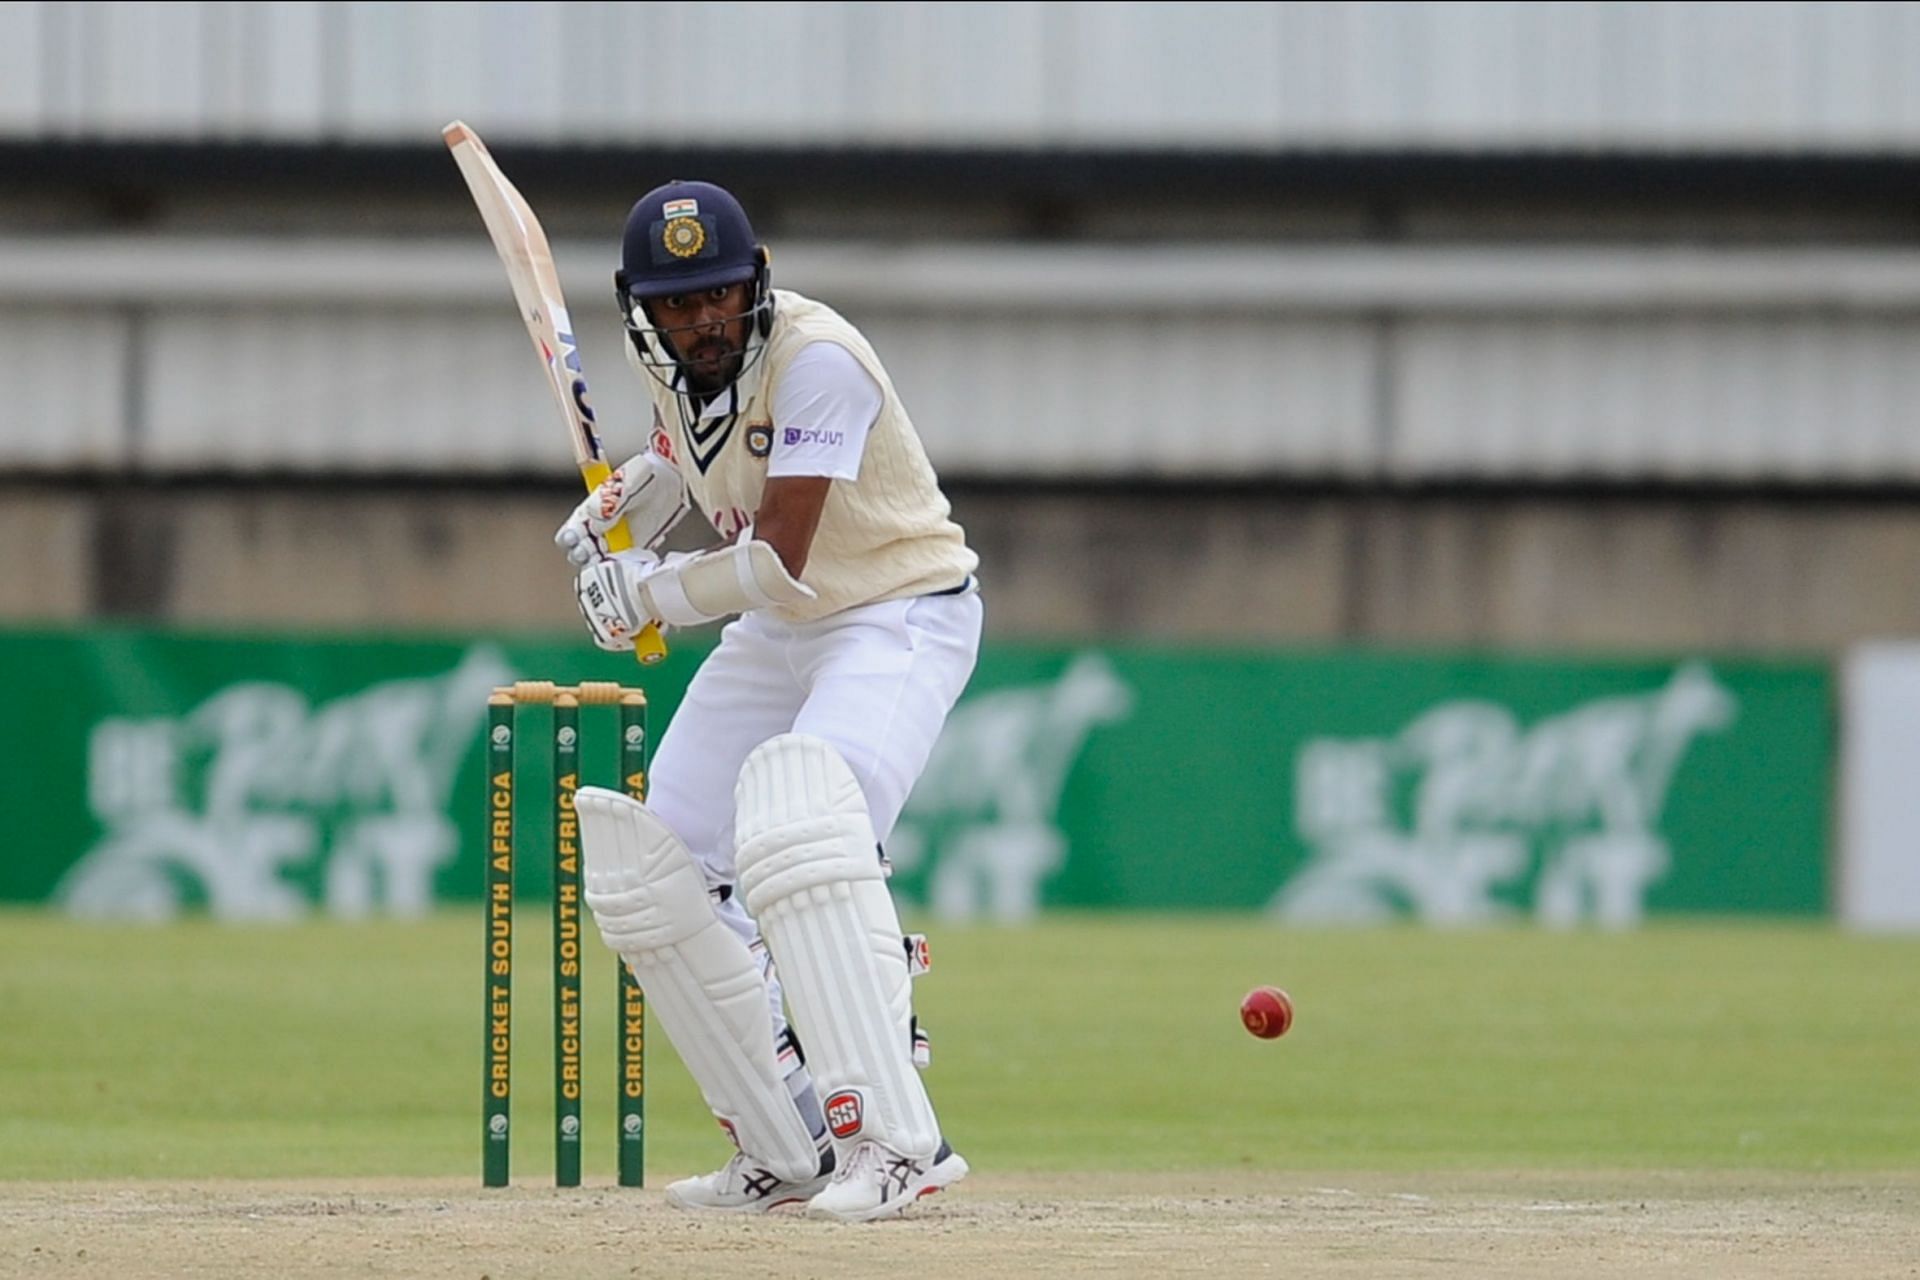 Easwaran is an opener India could invest in as they prepare for their next Australia and England tours.